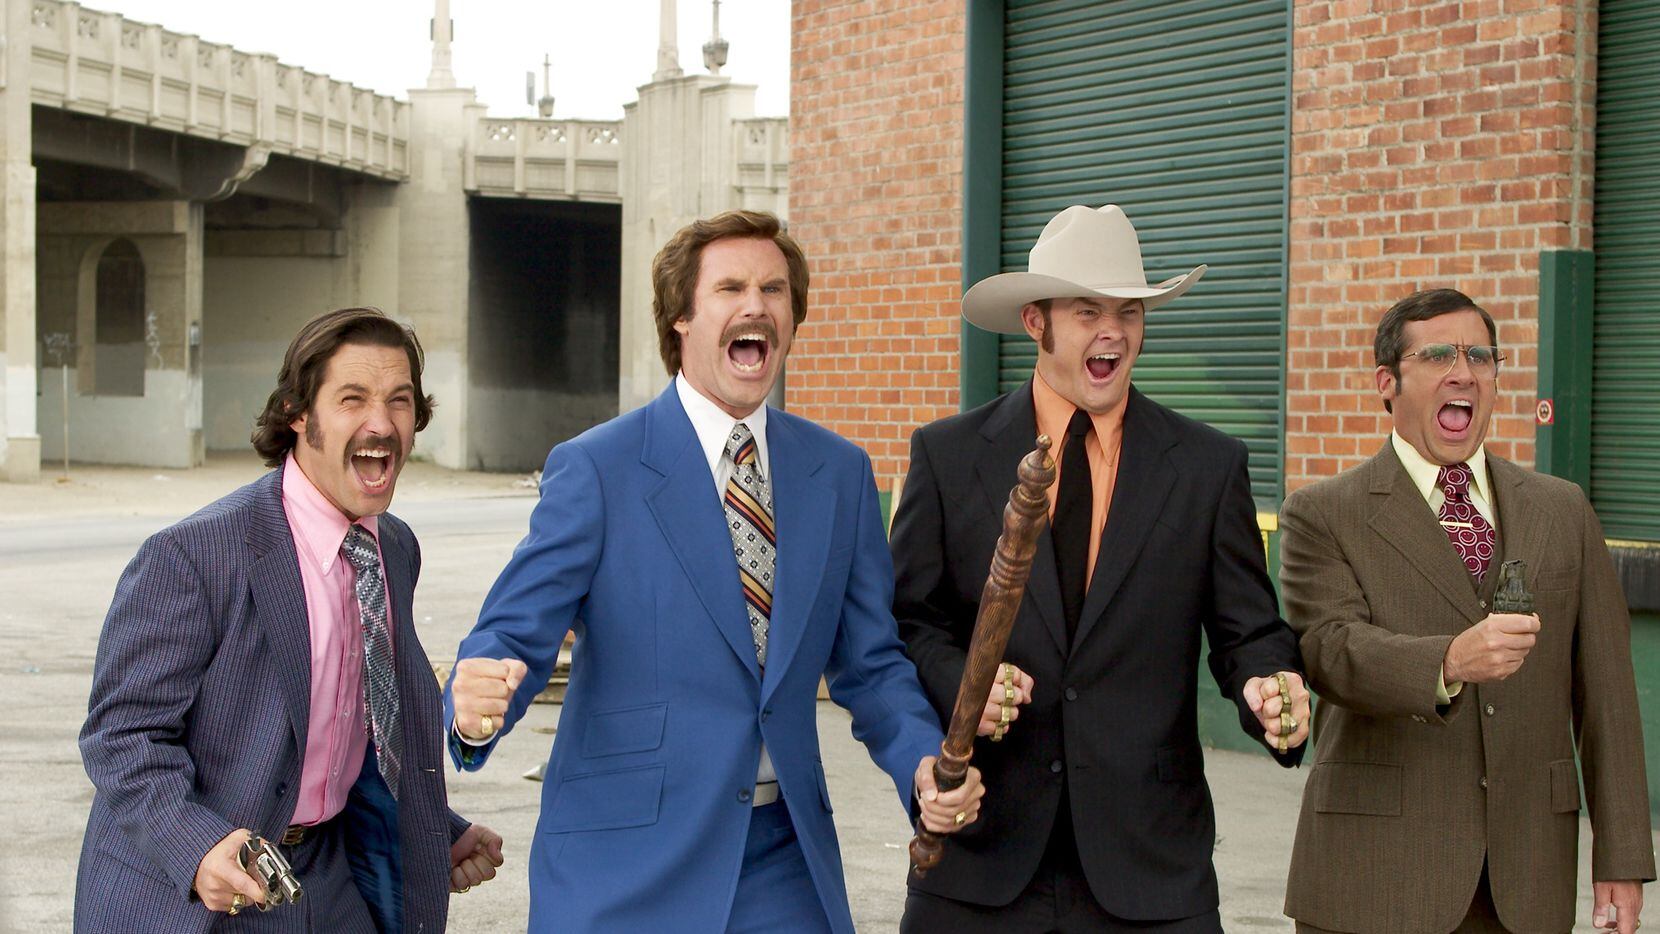 Left to right: Paul Rudd, Will Ferrell, David Koechner and Steve Carell in the 2004 movie...